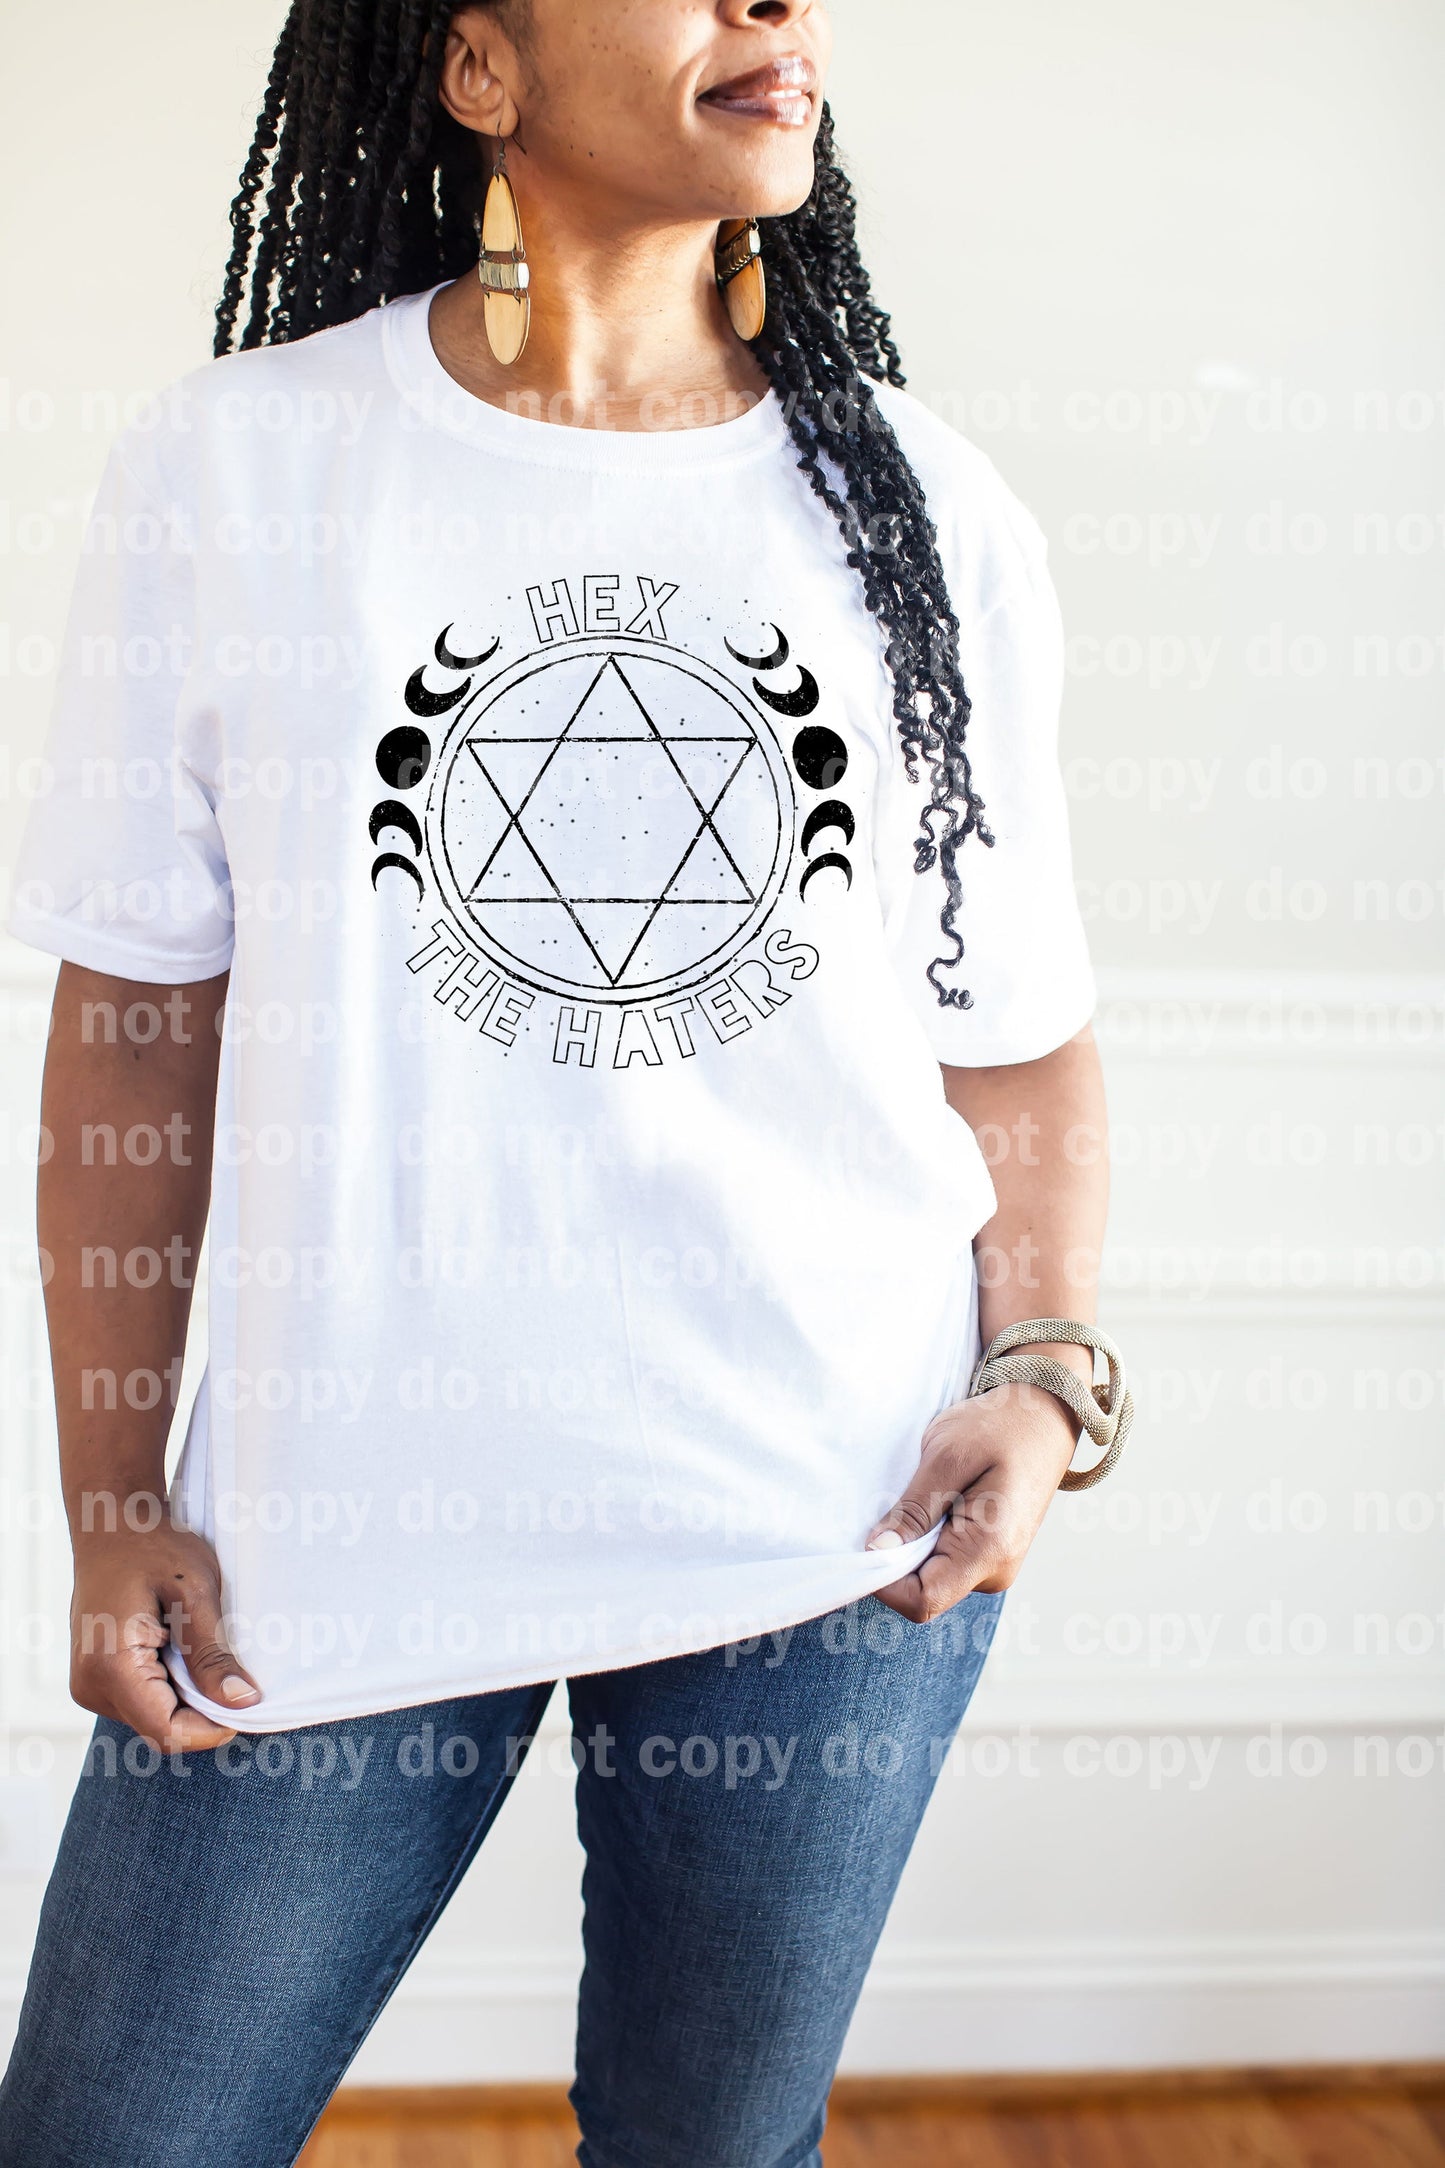 Hex The Haters Black/White Dream Print or Sublimation Print